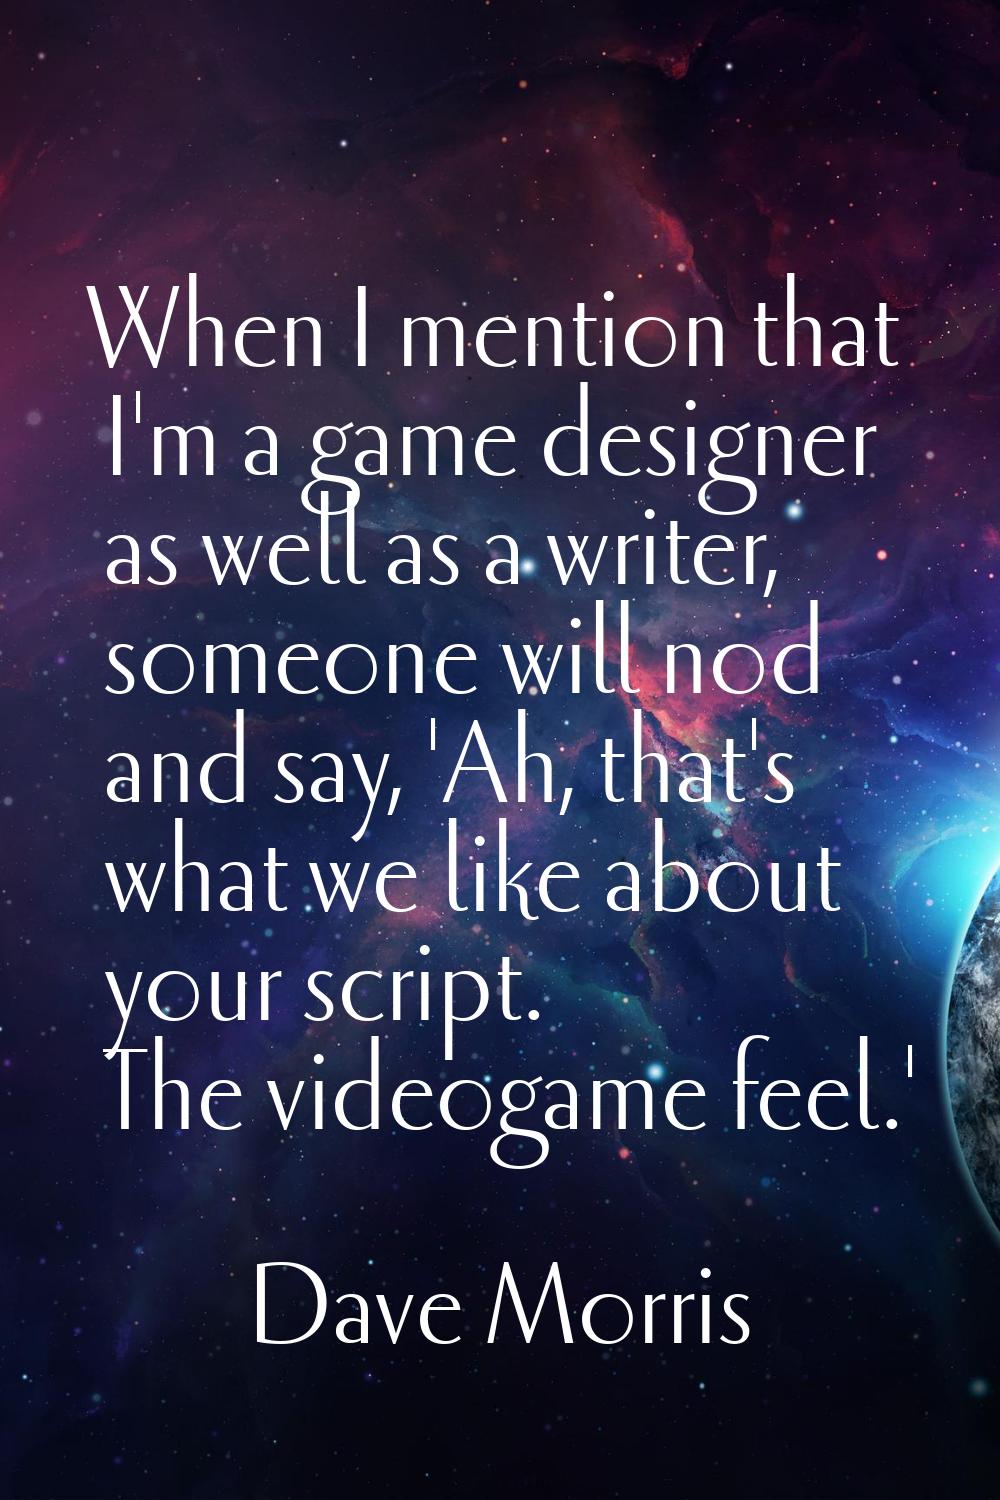 When I mention that I'm a game designer as well as a writer, someone will nod and say, 'Ah, that's 